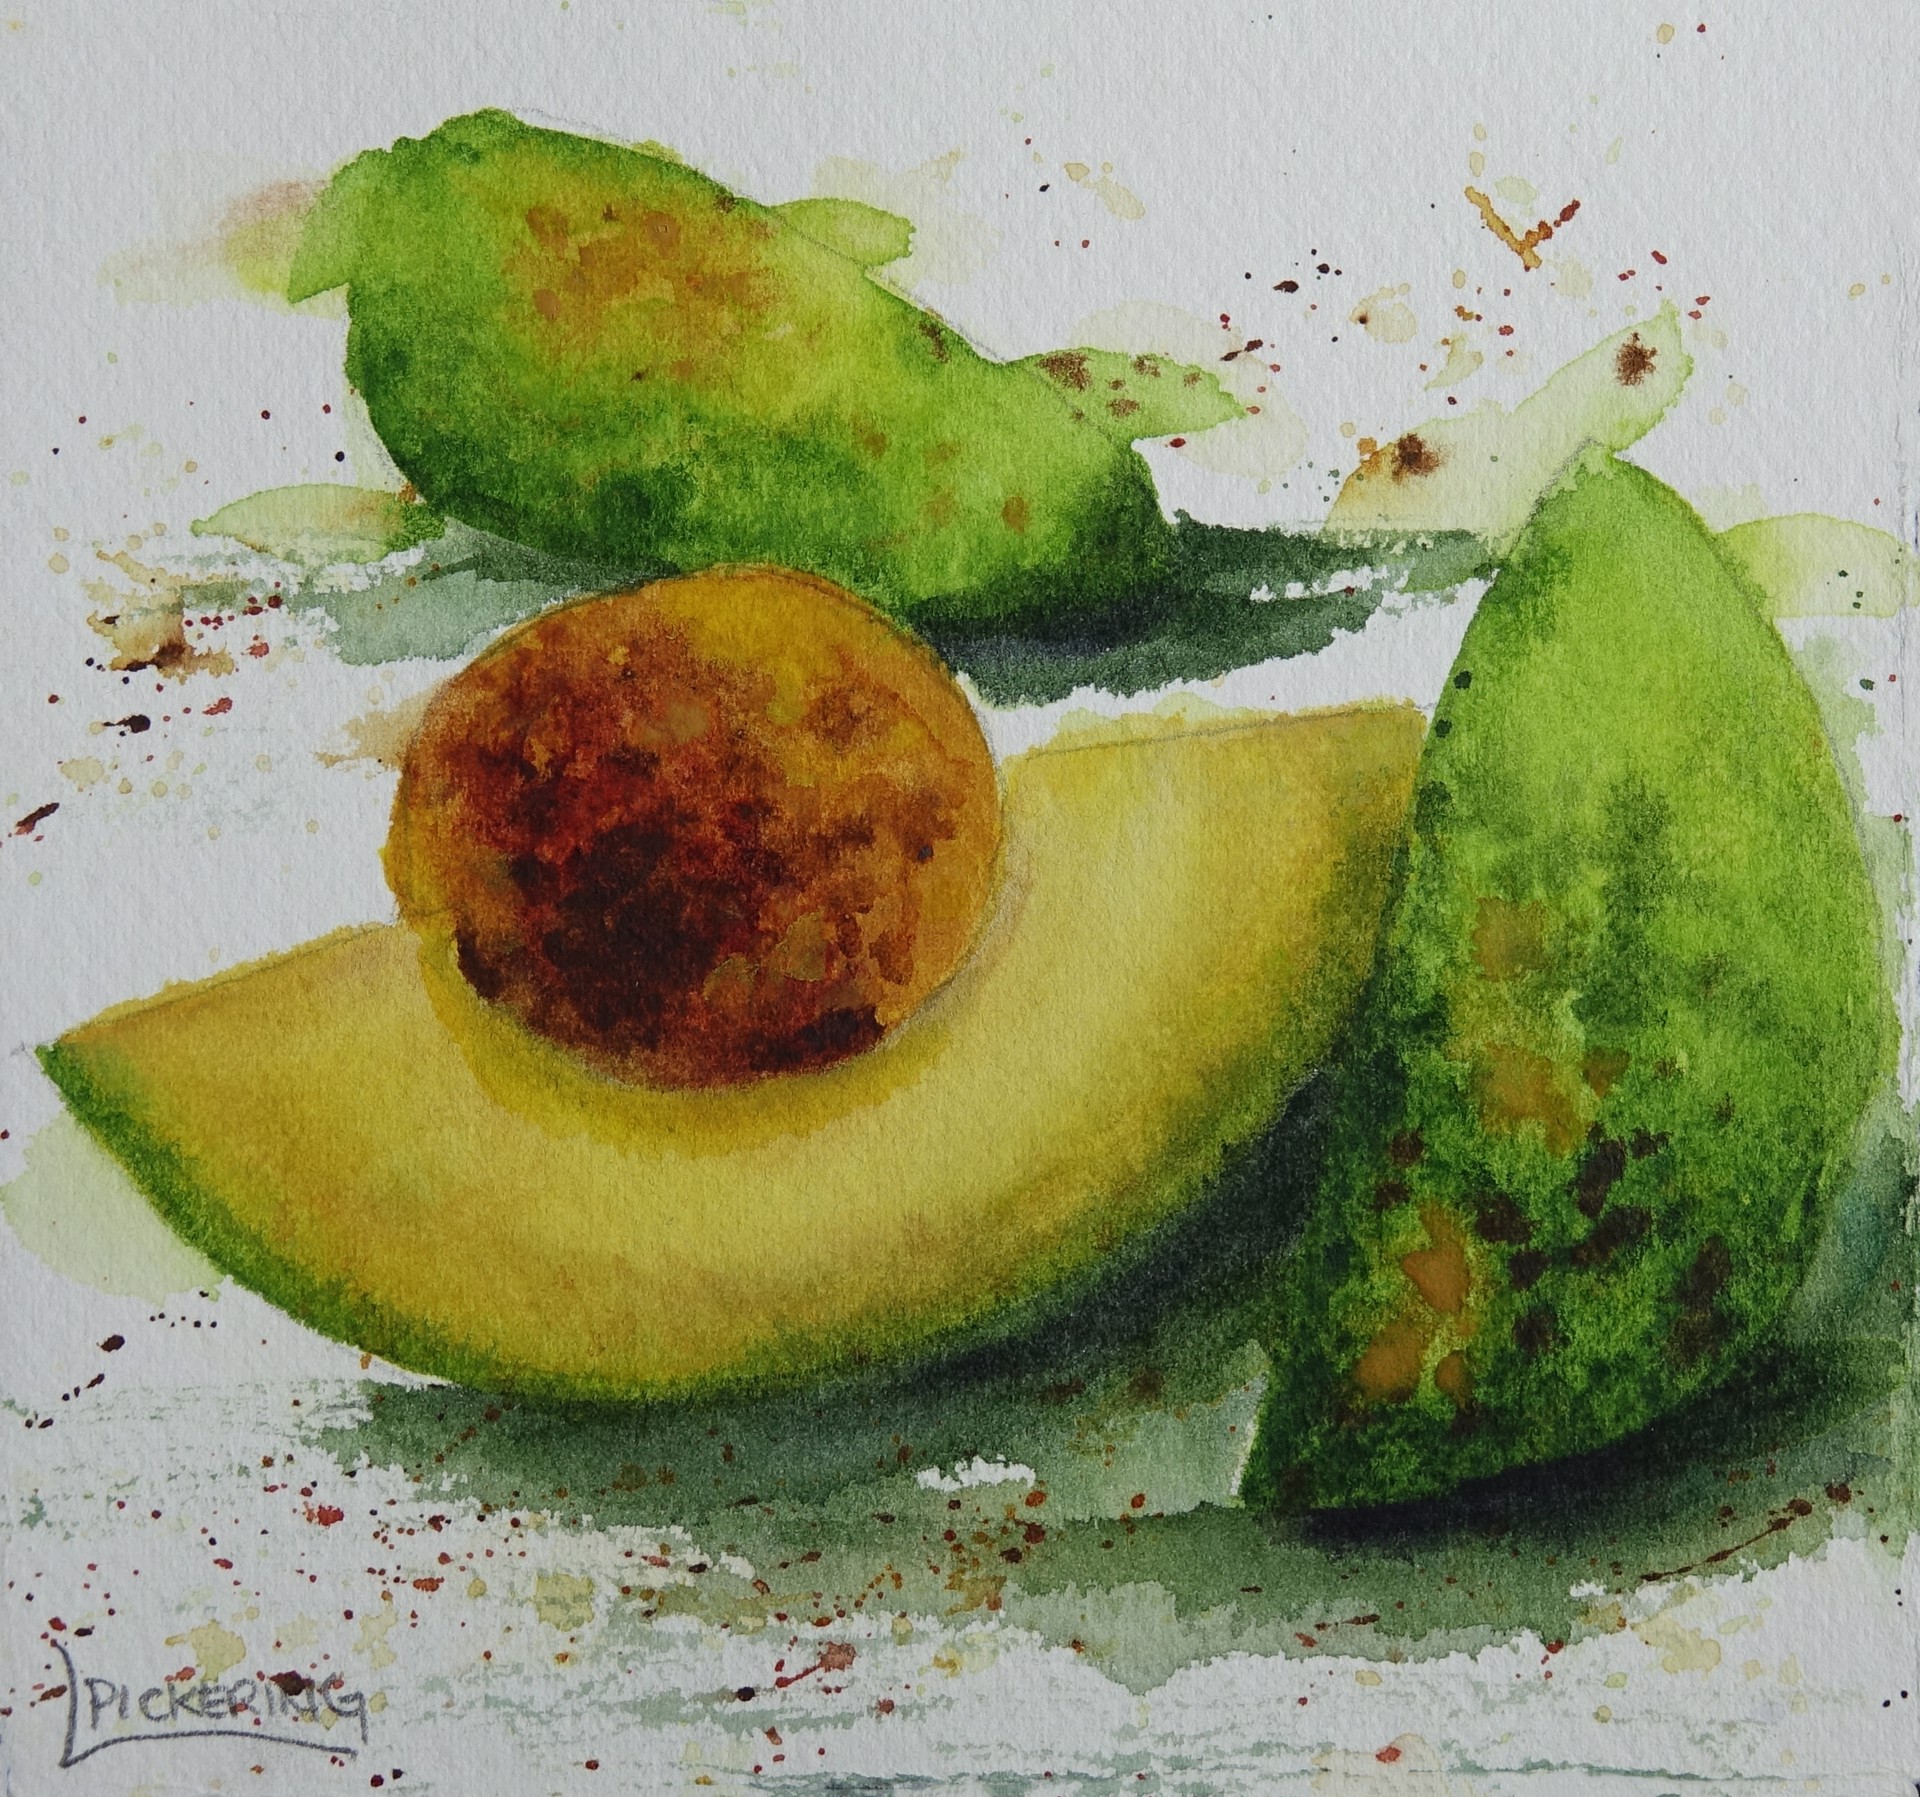 Luscious Avocados by Laura Pickering